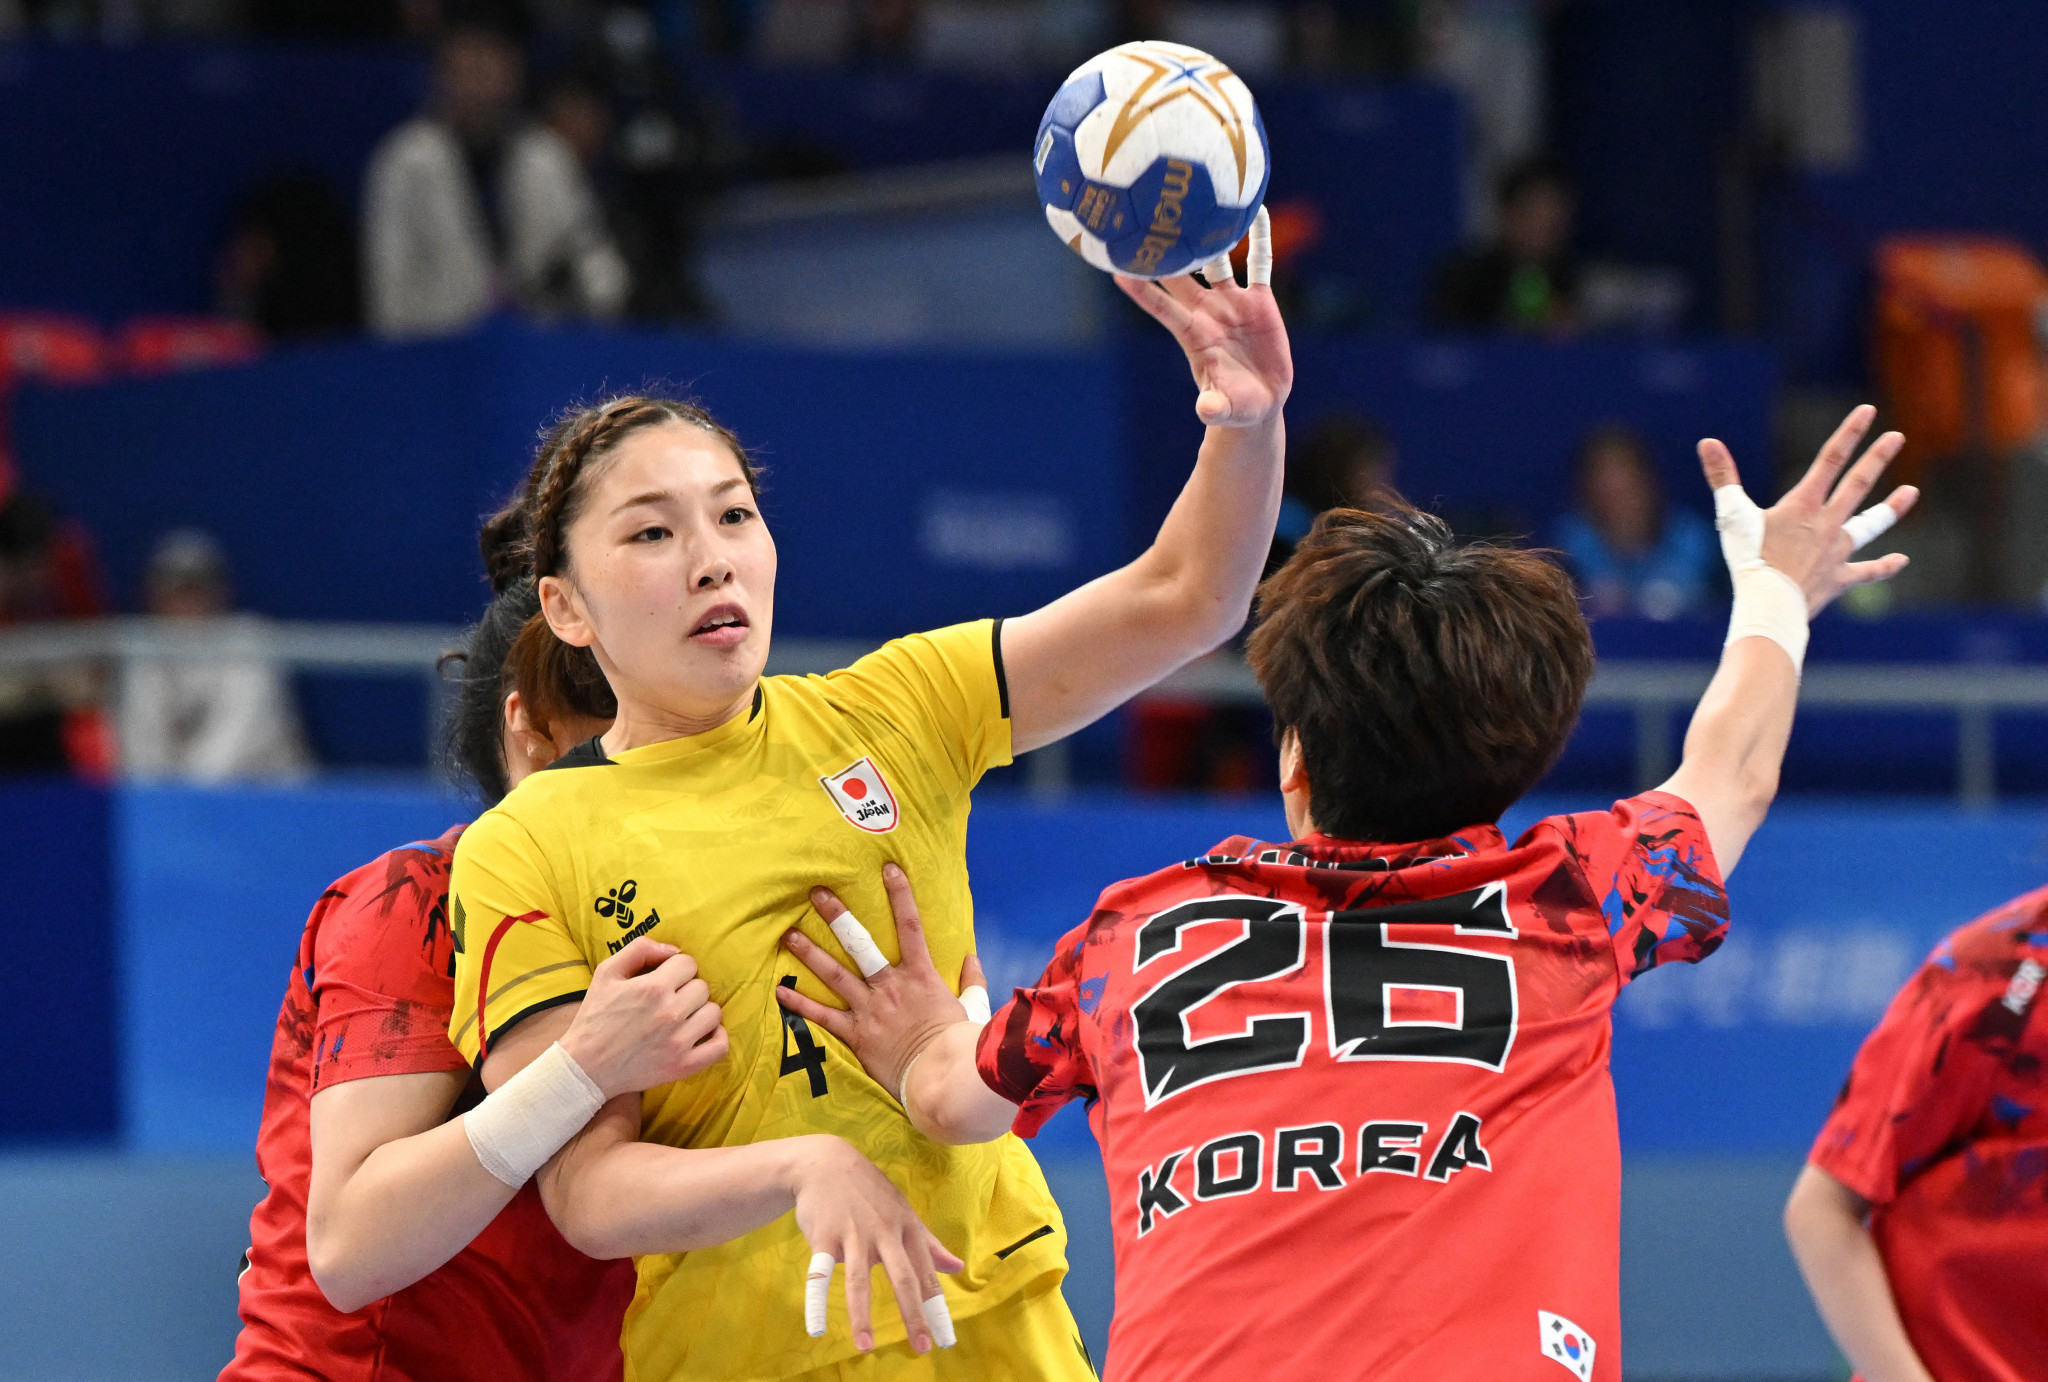 Japan ran out as 29-19 winners against South Korea in the women's handball final as they limited the opposition's efficiency to just 40 per cent ©Getty Images